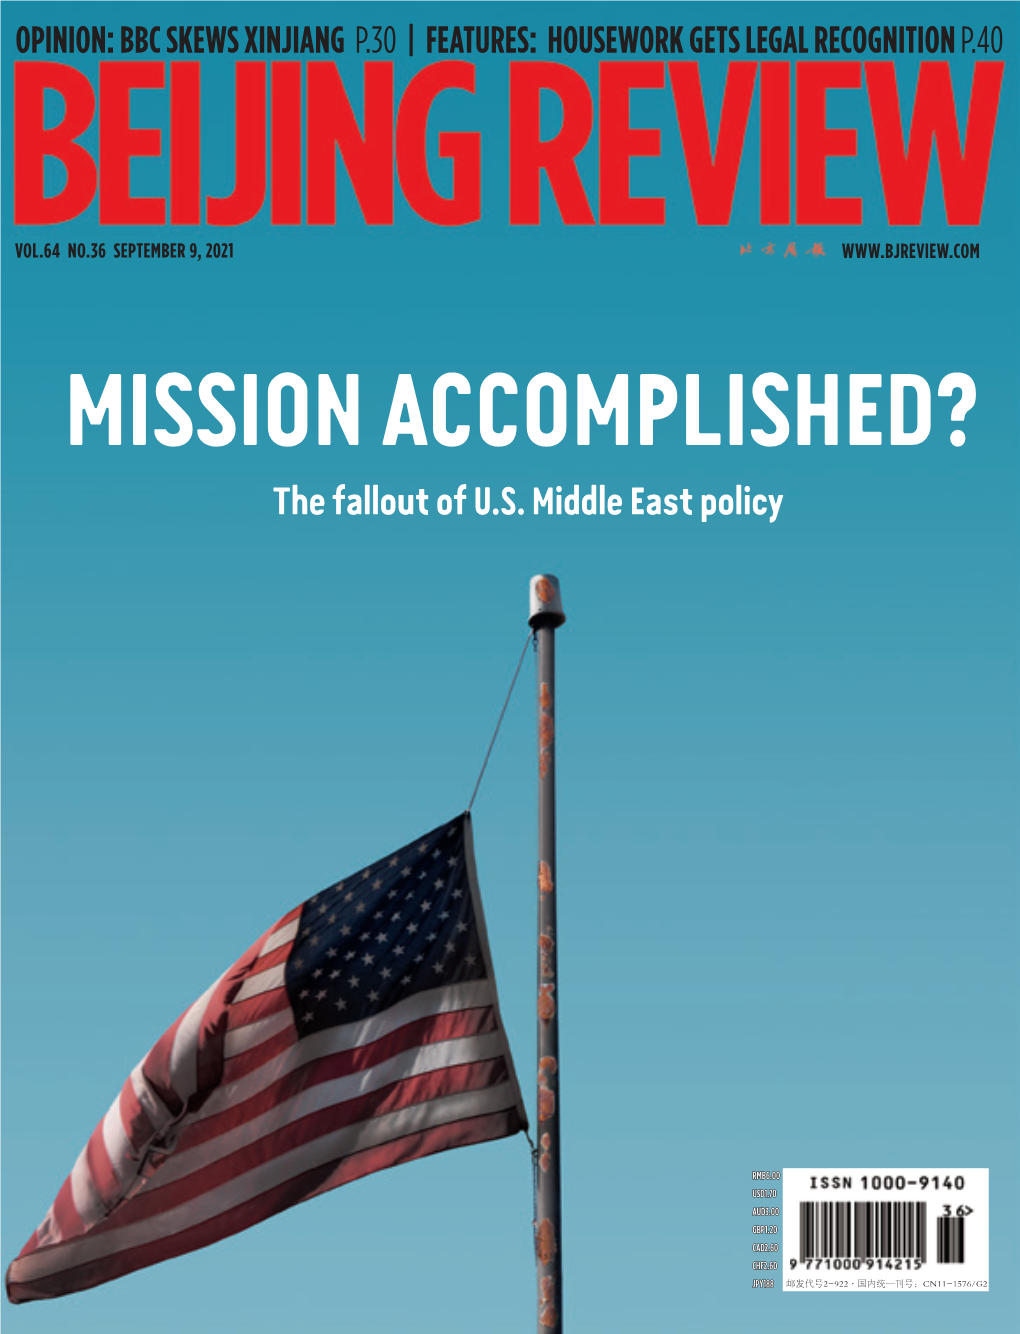 MISSION ACCOMPLISHED? the Fallout of U.S